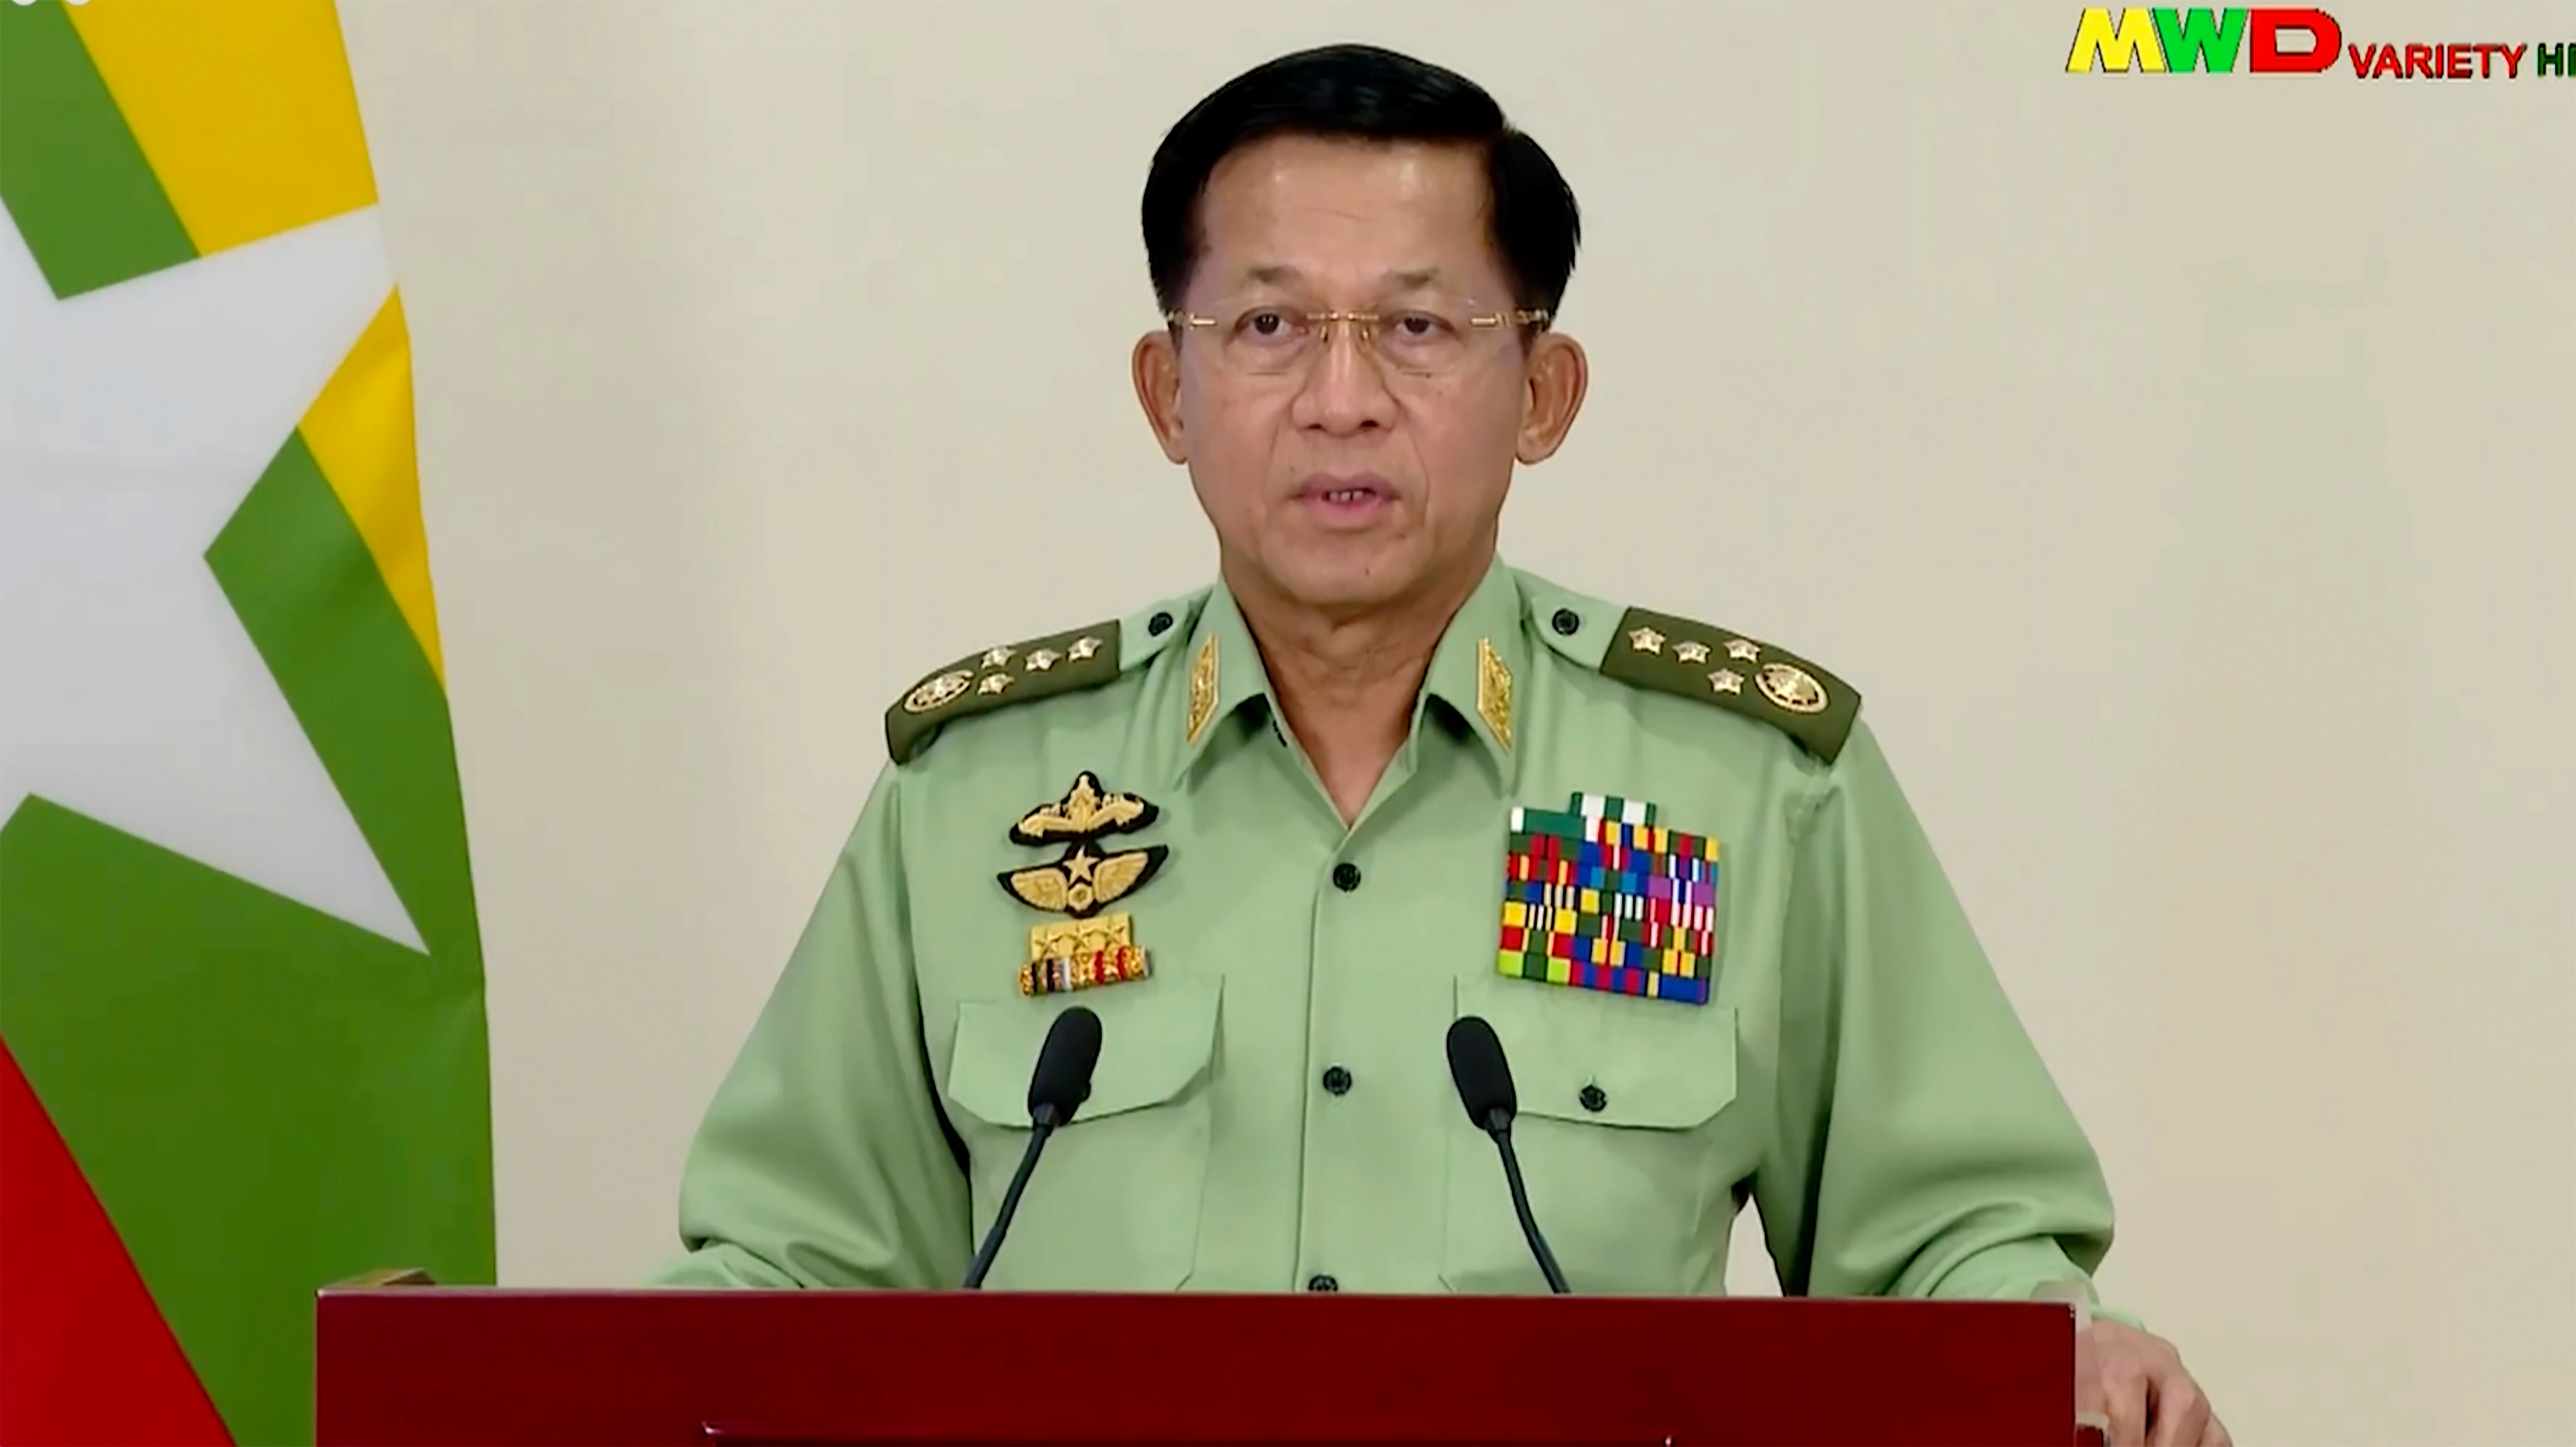 Myanmar Commander-in-Chief Senior Gen. Min Aung Hlaing speaks in Naypyitaw, Myanmar. In his first speech to the nation after grabbing power a week ago, Myanmar’s military chief blamed politicians and the election commission for forcing him to stage the coup d’état